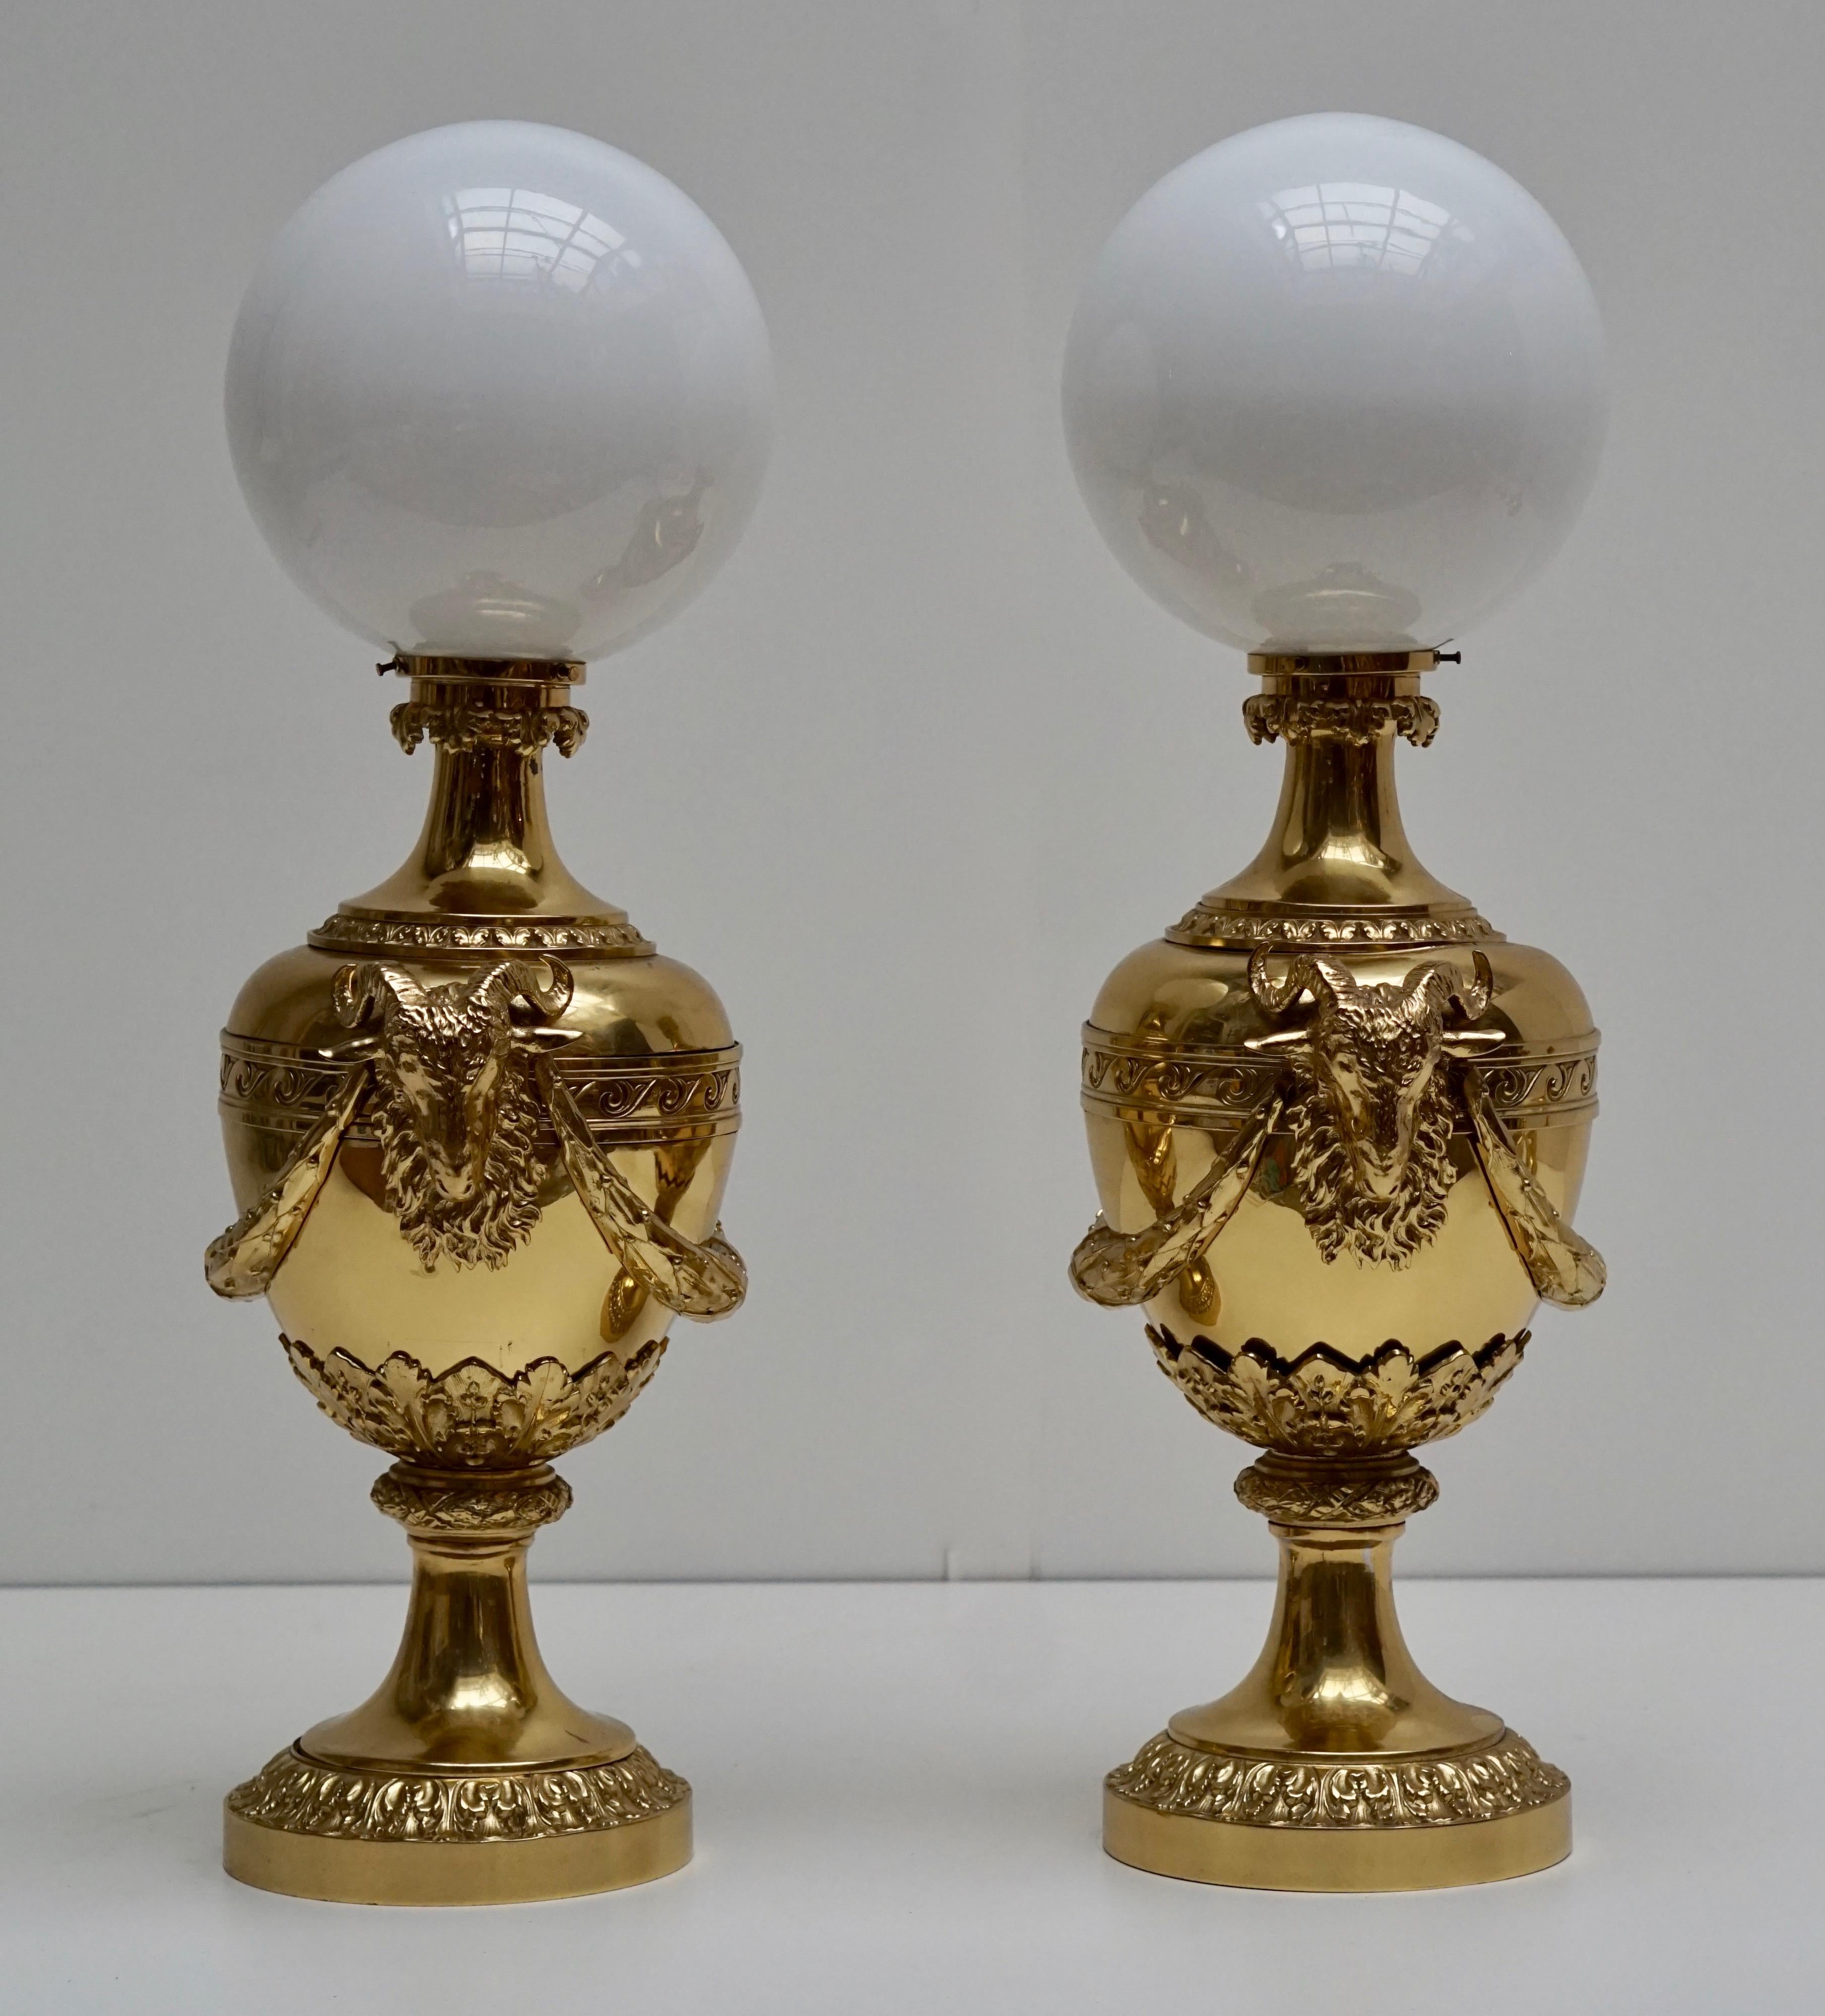 Gilt Pair of Mid-20th Century Hollywood Regency Rams Head Urn Lamps For Sale